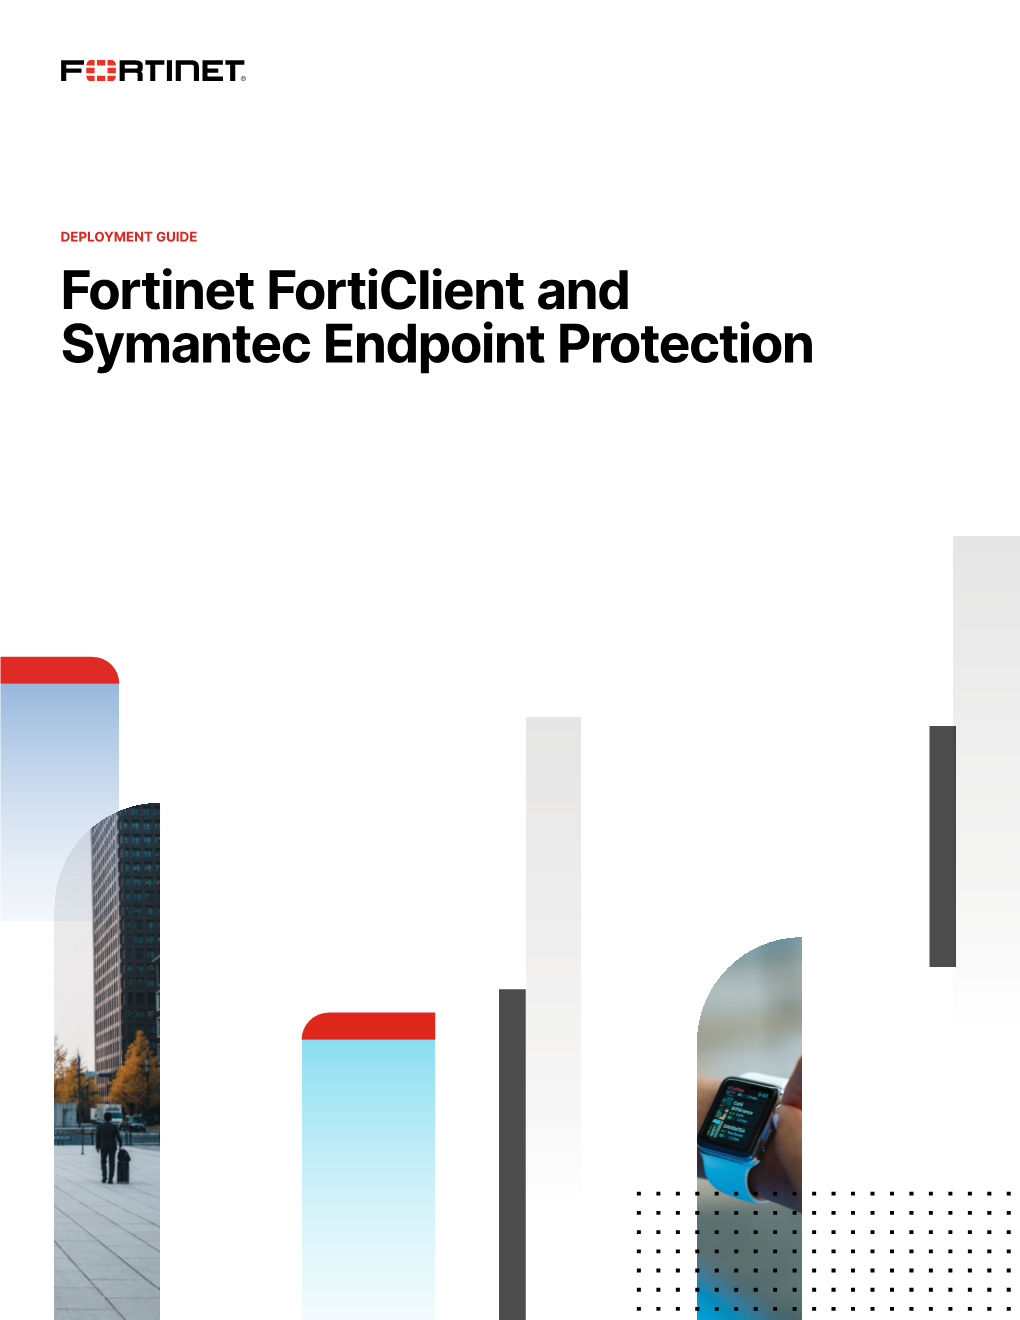 Fortinet Forticlient and Symantec Endpoint Protection Table of Contents